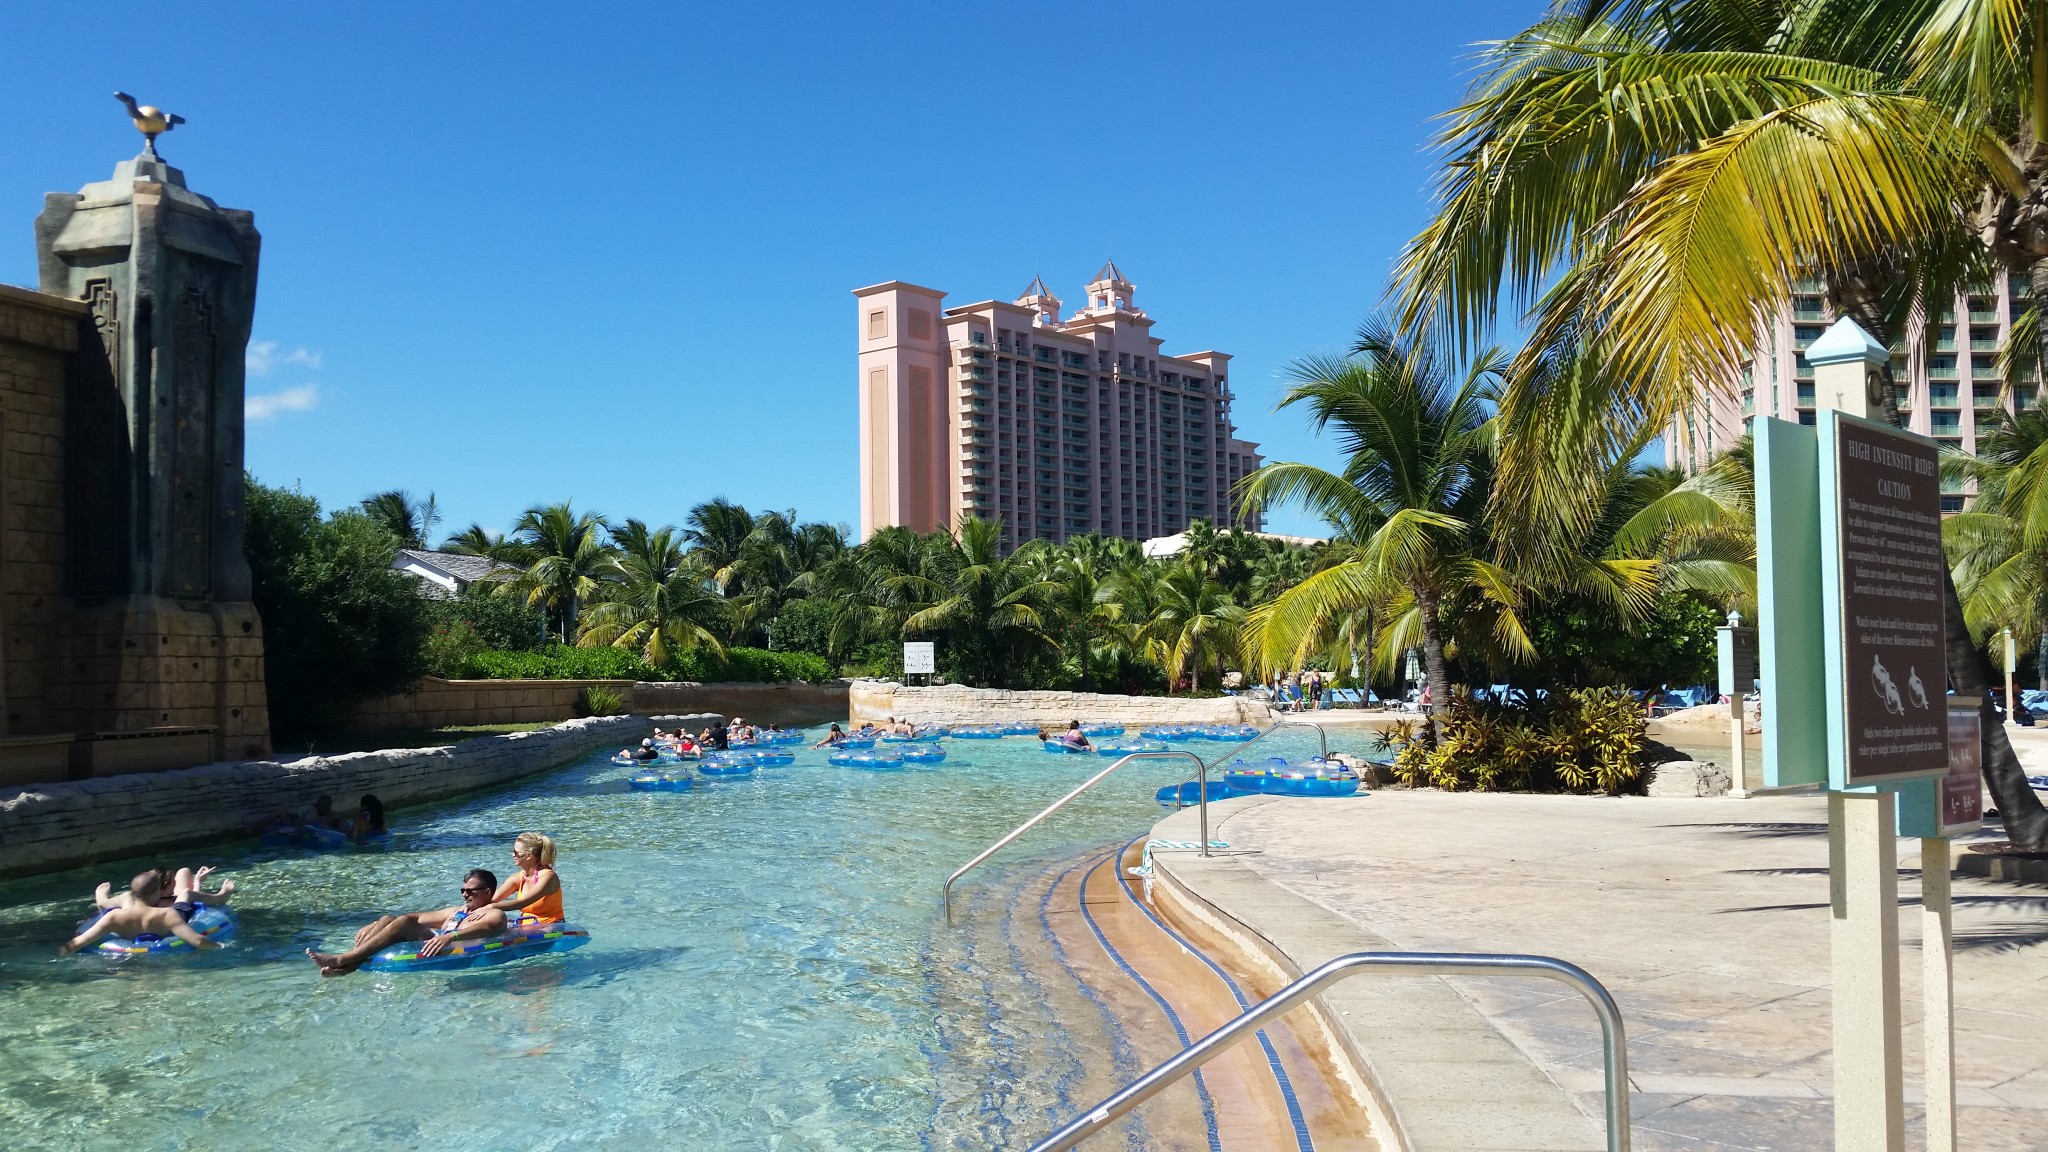 Save Up To 50% with Atlantis, Paradise Island’s Black Friday and Cyber Monday Sale